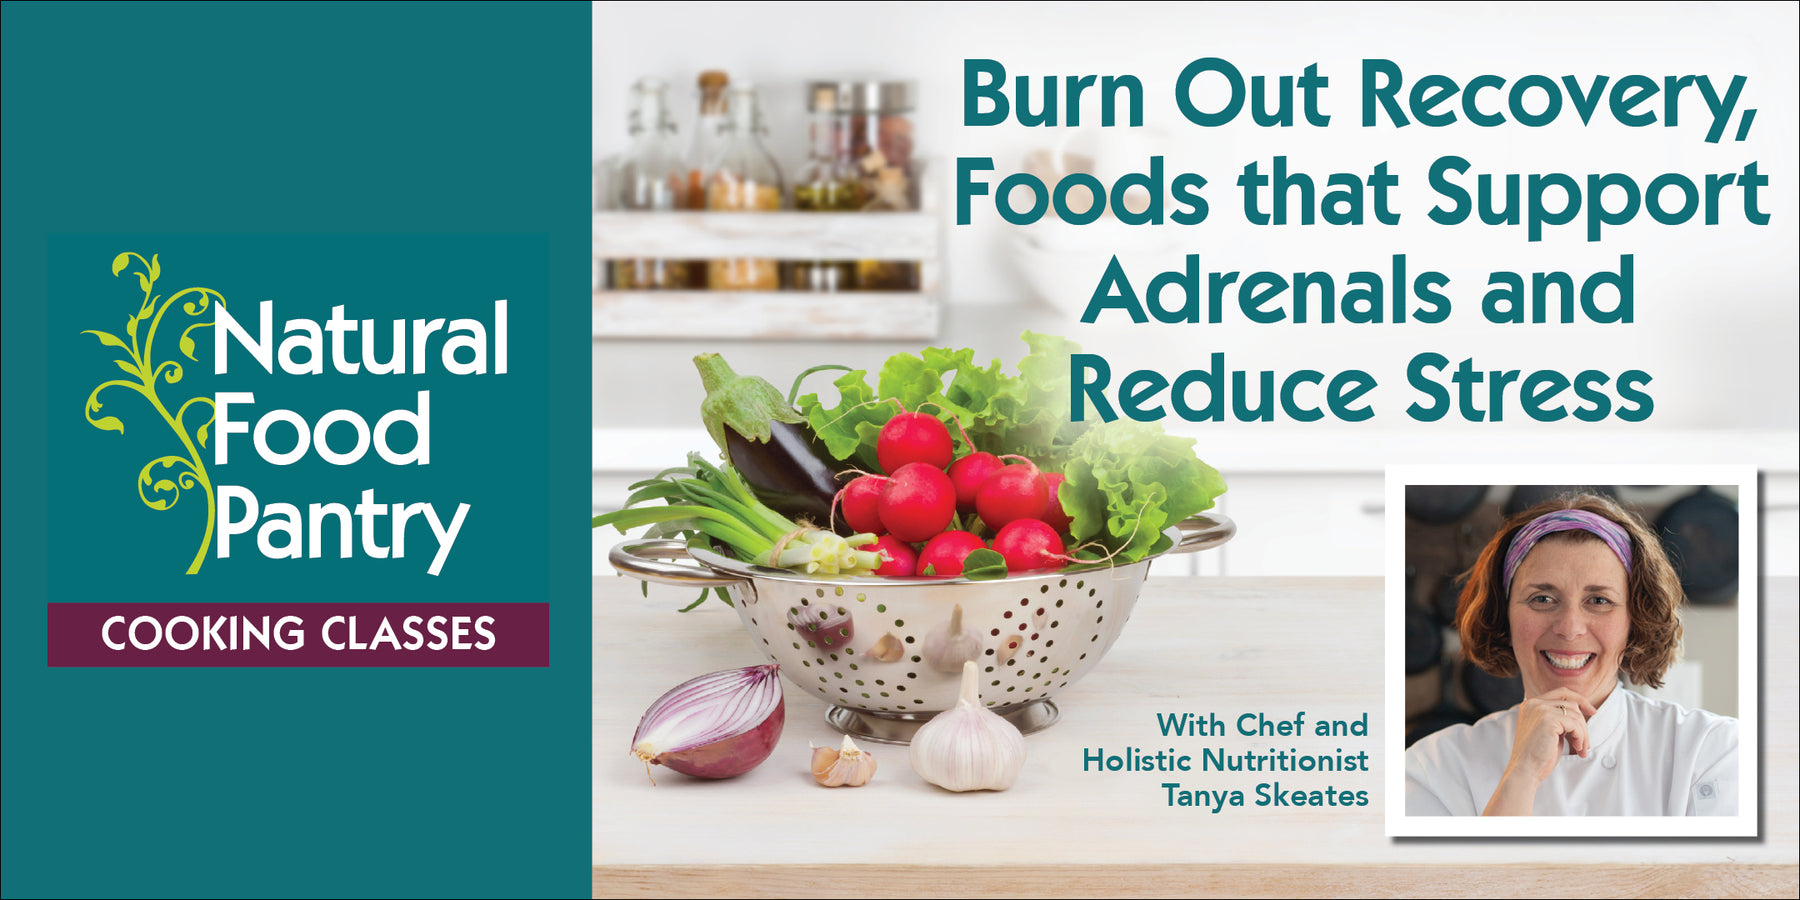 Oct 24: NFP Cooking Class - Burn Out Recovery, Foods that support adrenals and reduce stress